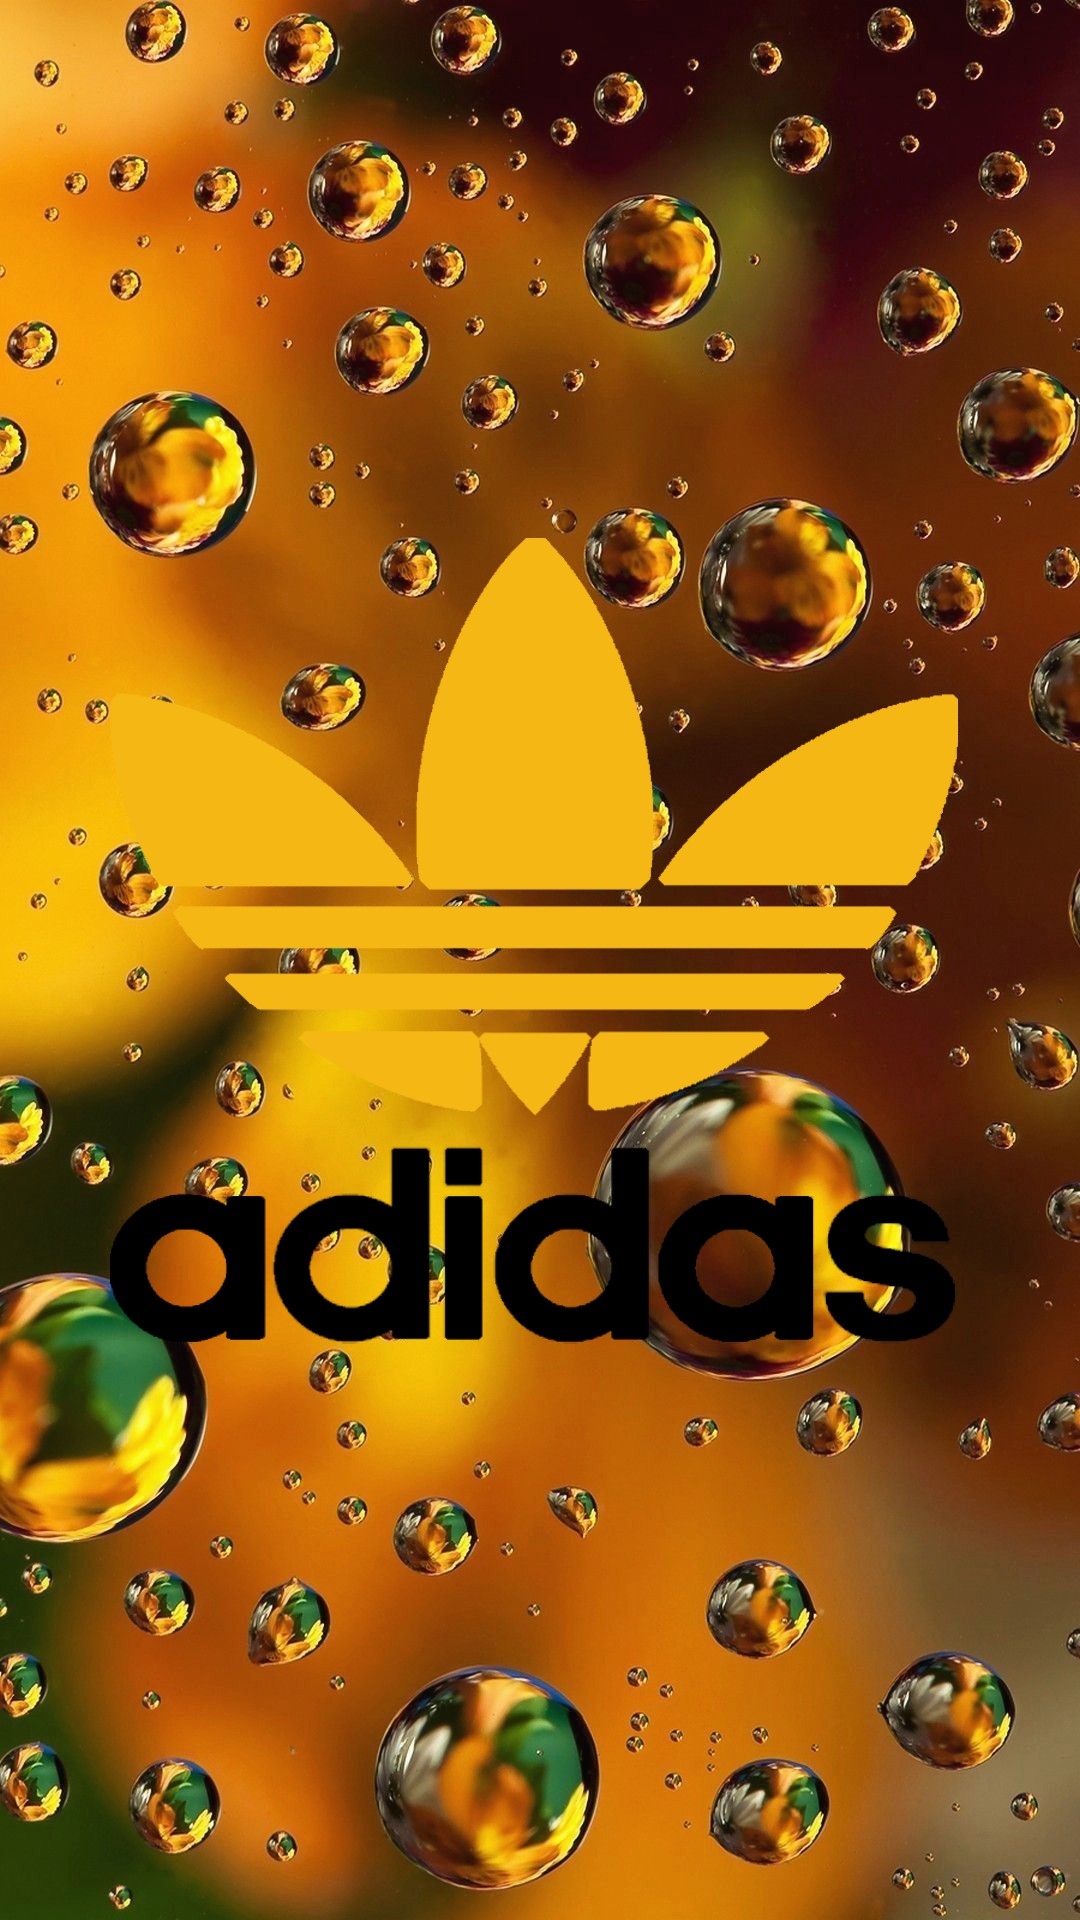 Products/Adidas (1080x1920) Wallpaper